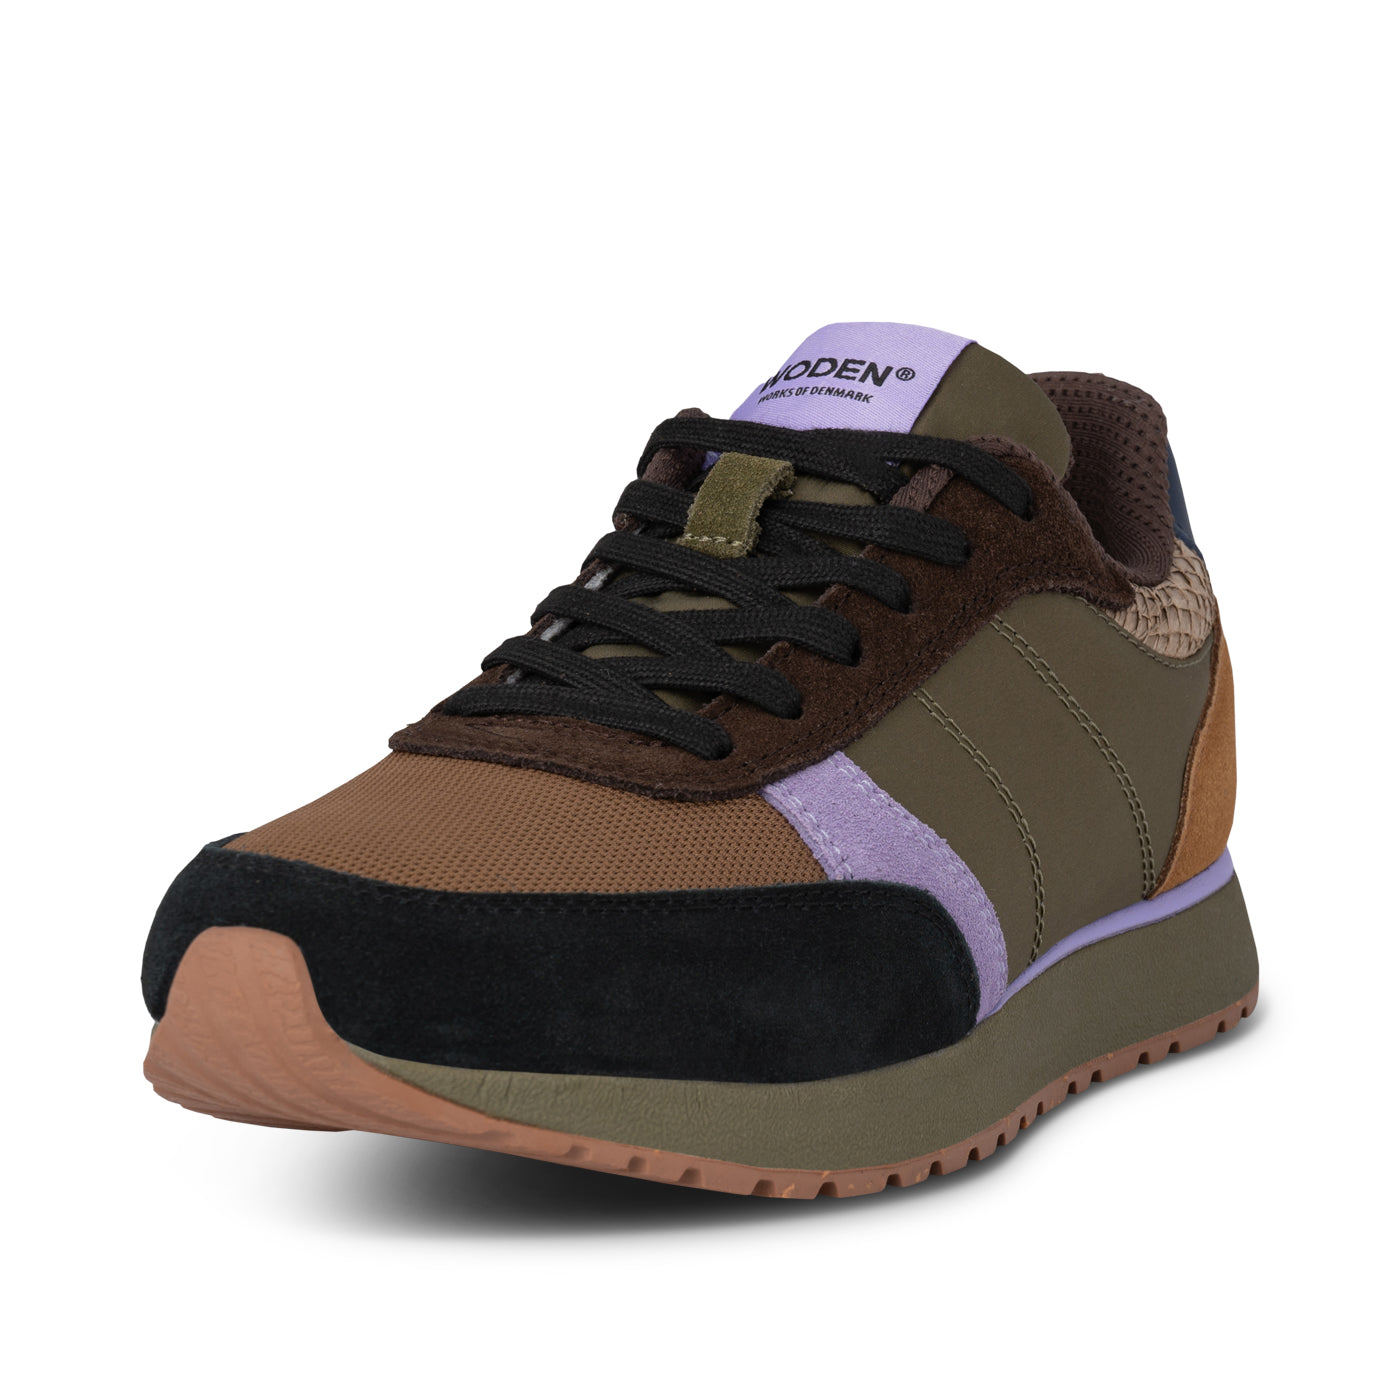 WODEN Ronja Sneakers 214 Dark Olive/Orchid